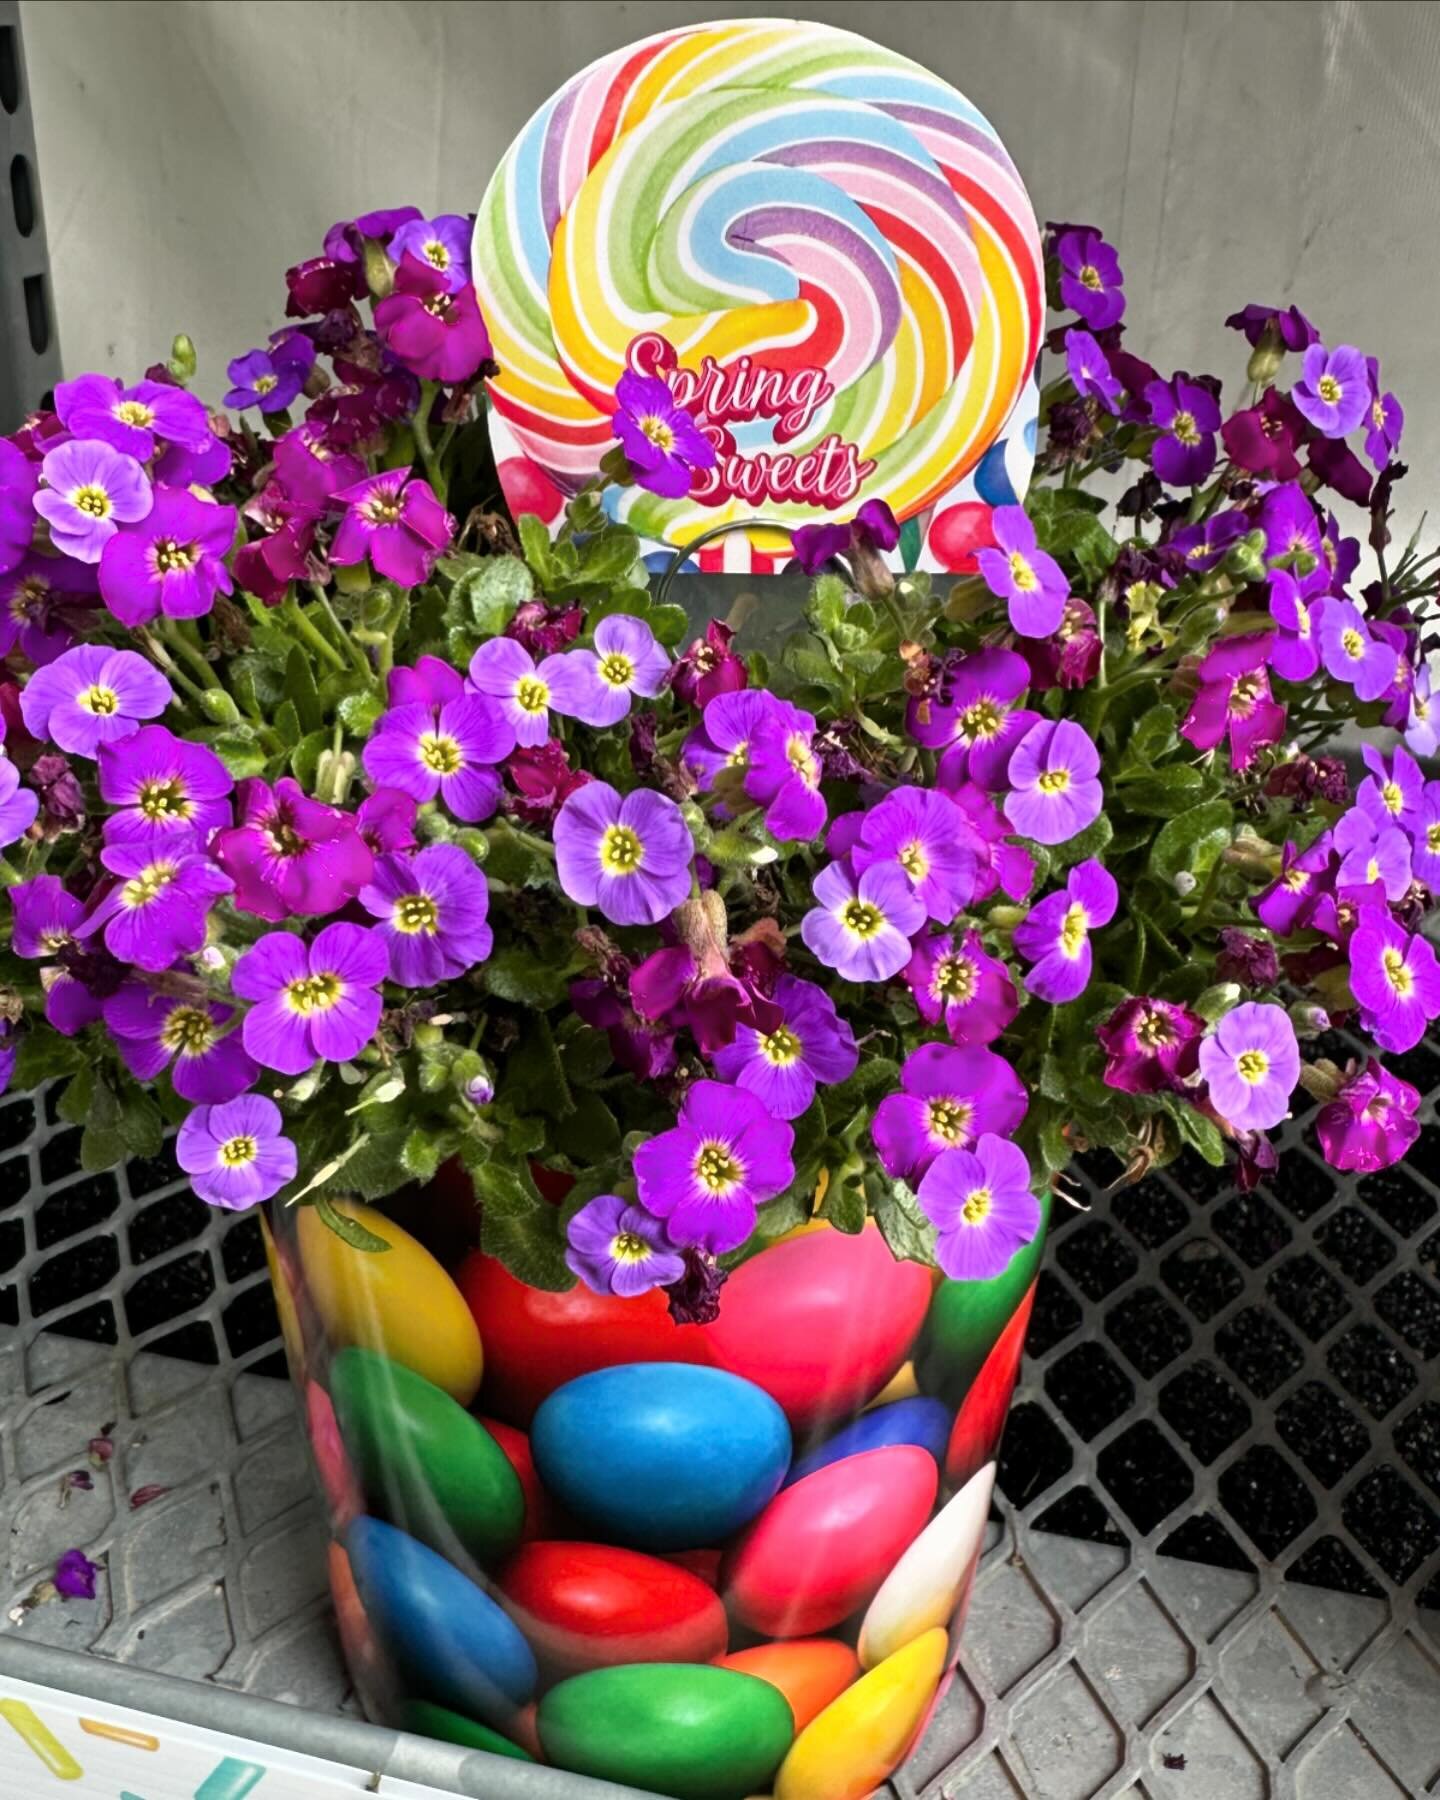 It was a great week in Pomona, CA at the Home Depot spring trials presenting ThinkPlants perennials. We also introduced a fun marketing idea for early spring perennials- Spring Sweets! 
#perennials #thinkplants #springsweets 
#thinkplants #perennials